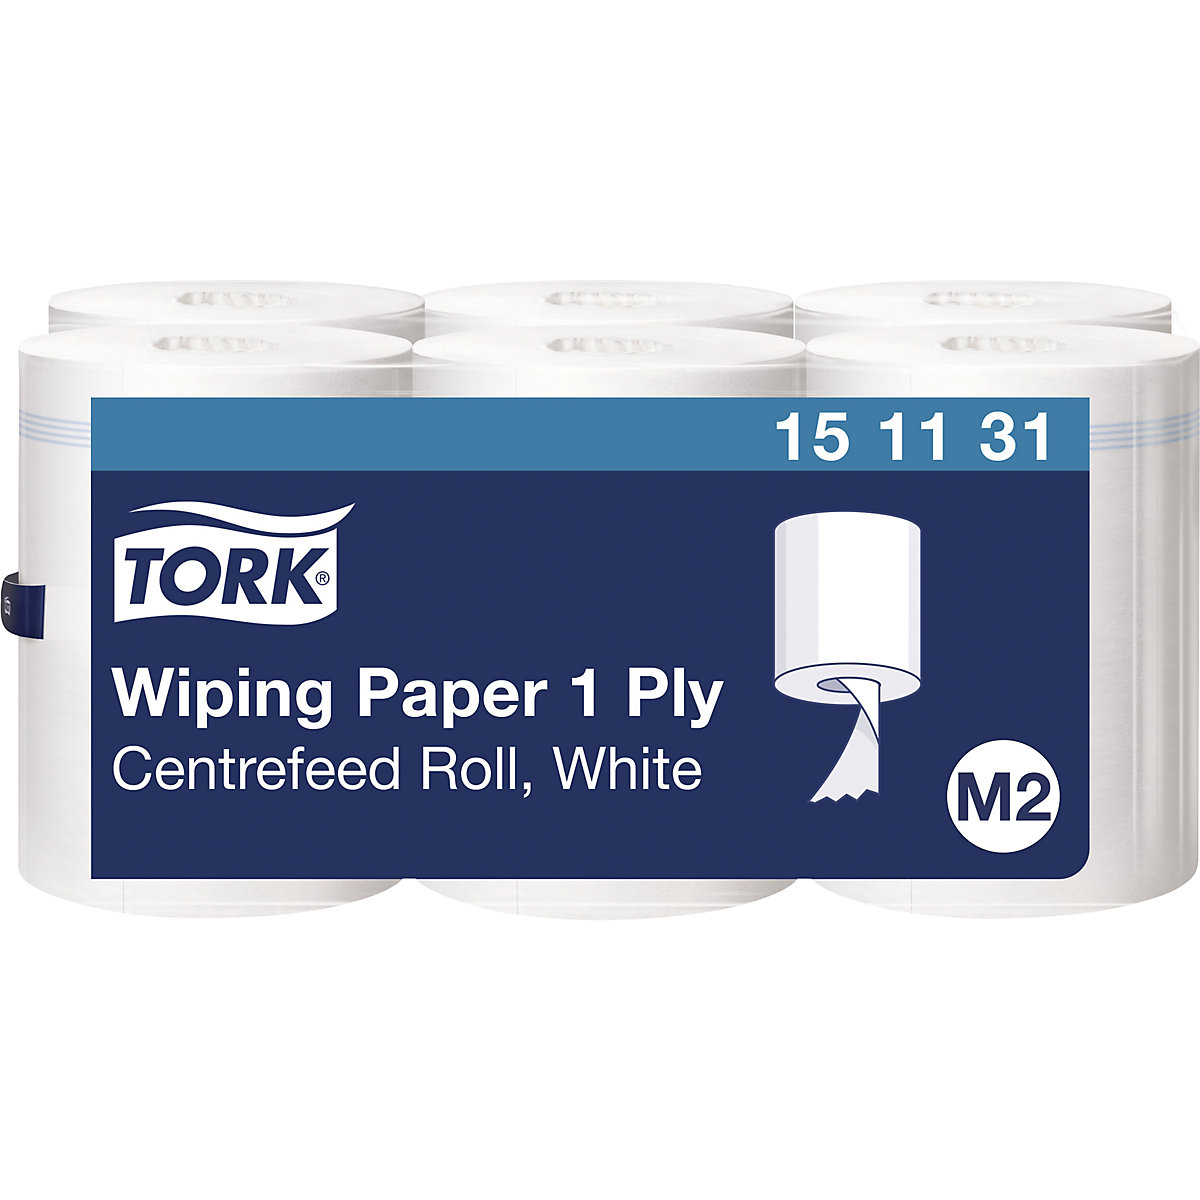 Centrefeed paper wipes – TORK